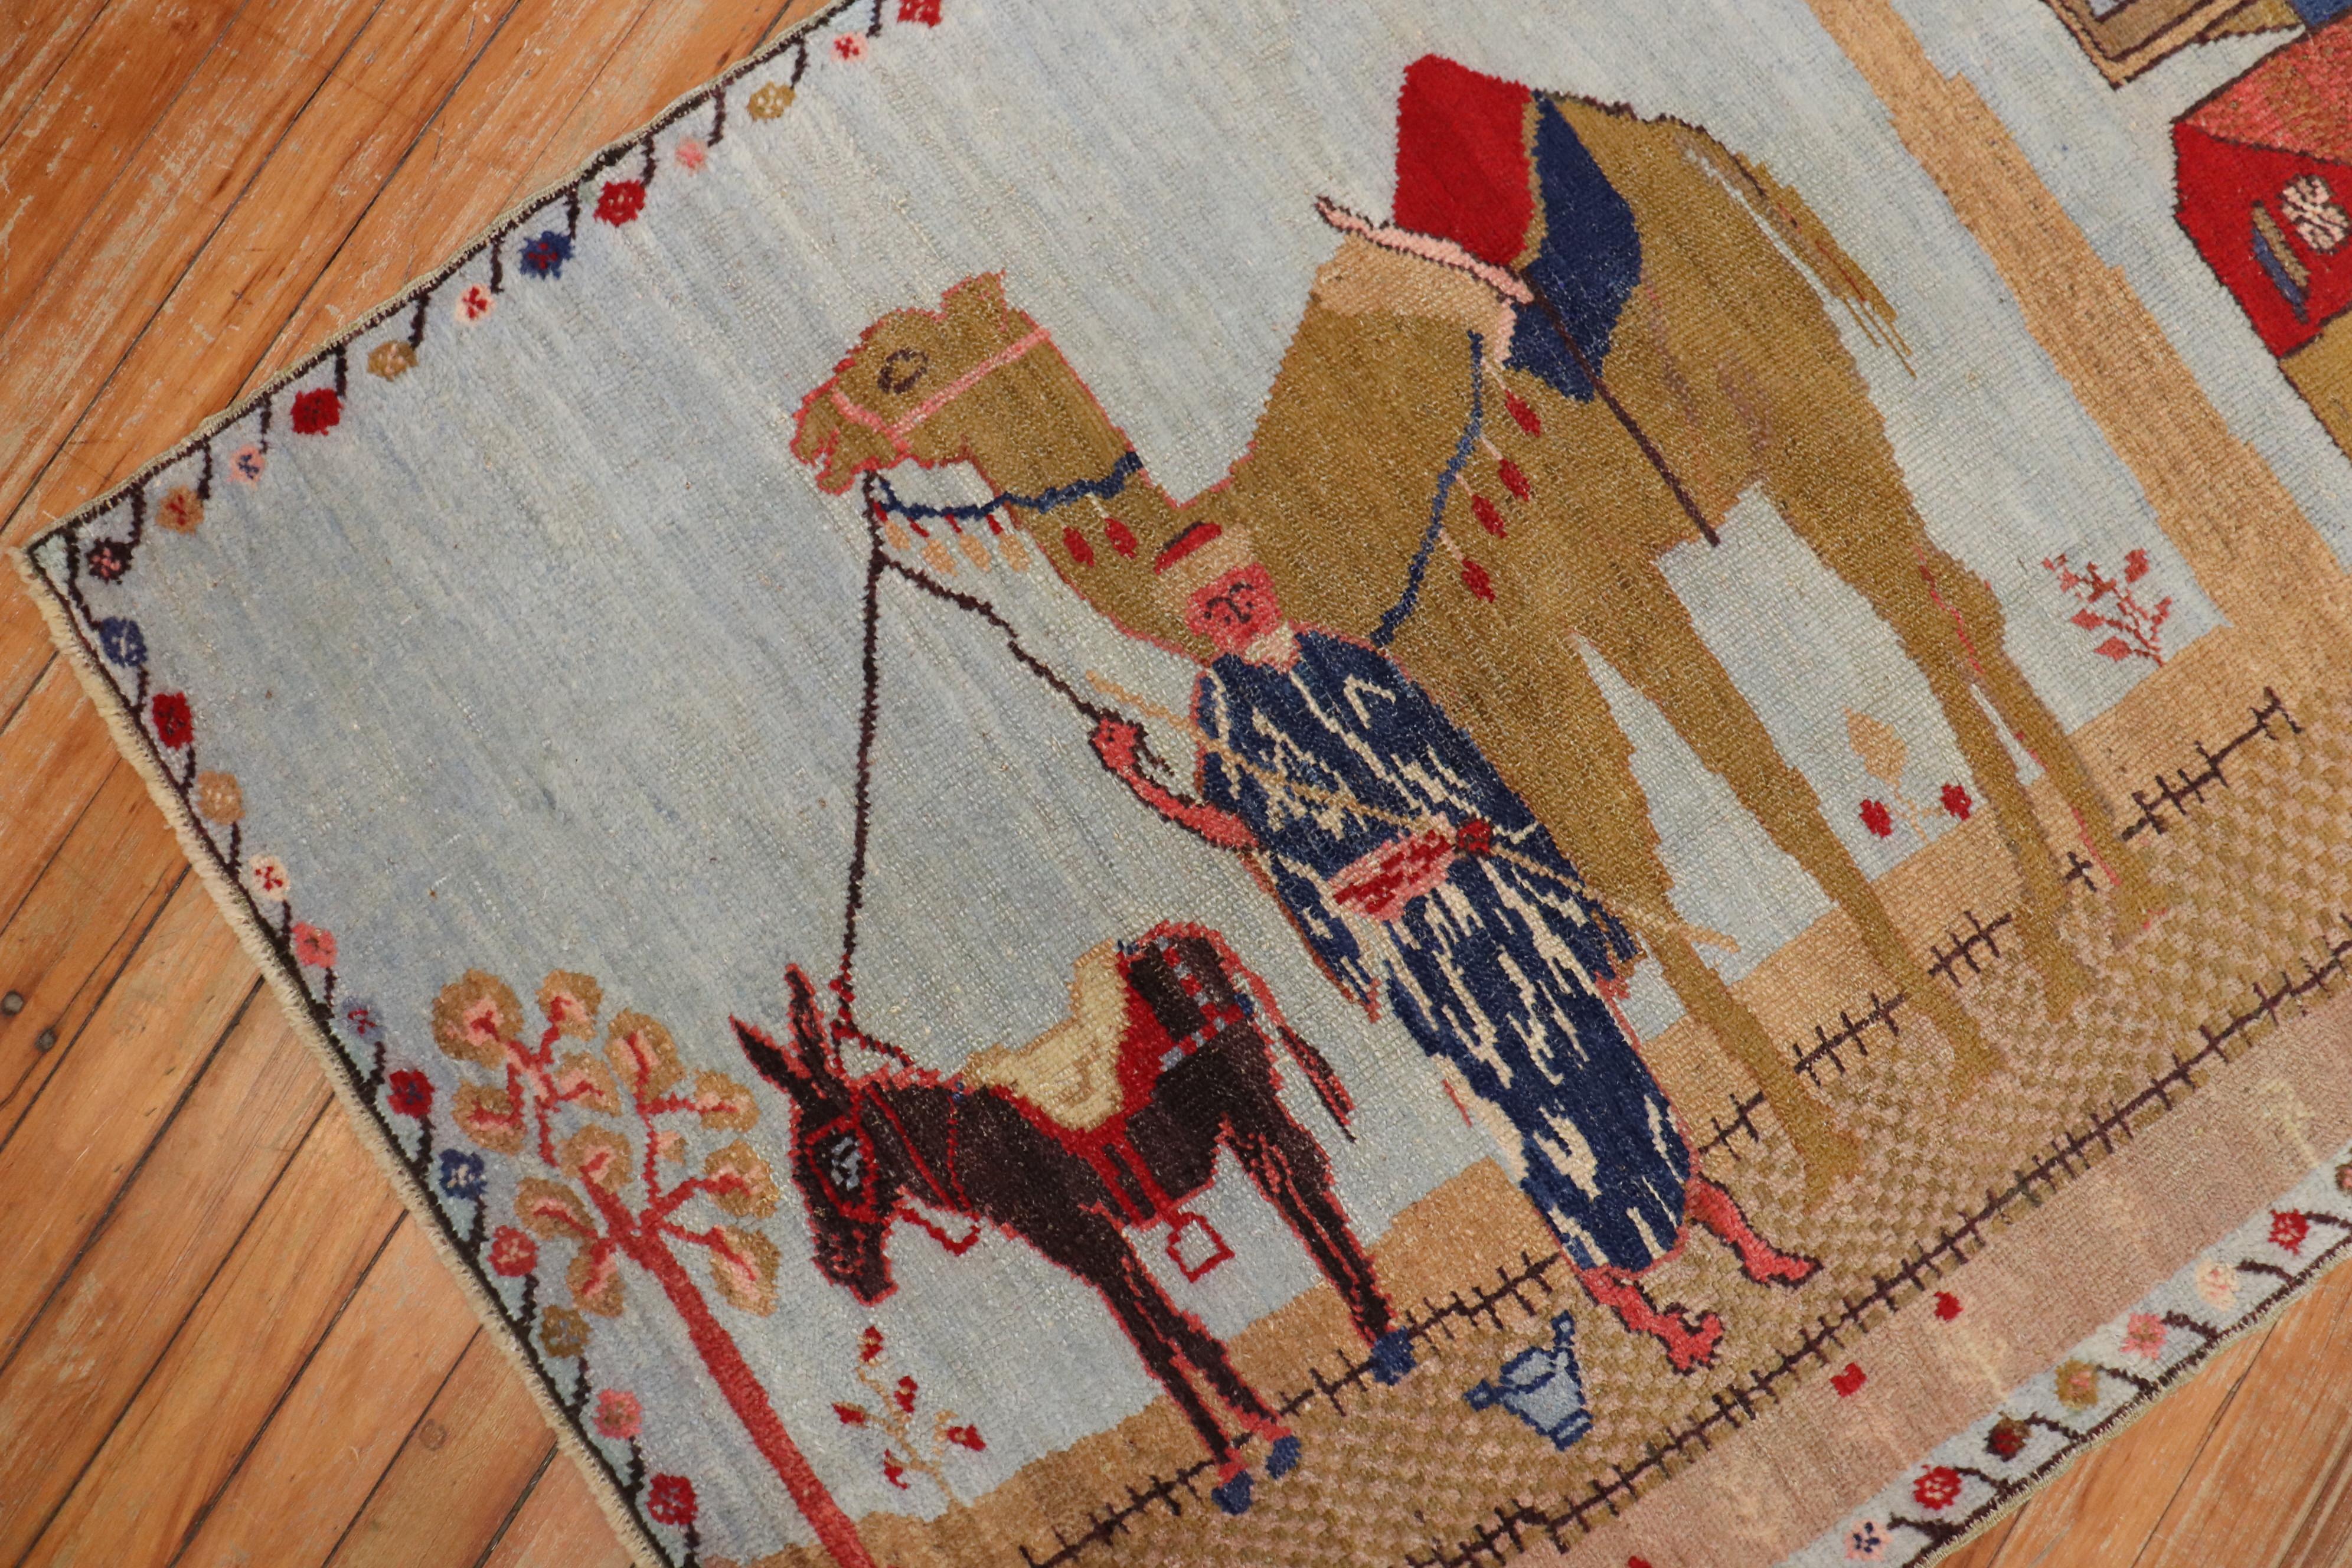 Mid-20th century Turkish pictorial rug woven in central turkey depicting a large camel and a small horse latched onto an older man with 2 trees and a house in the background

Size: 3' x 4'.